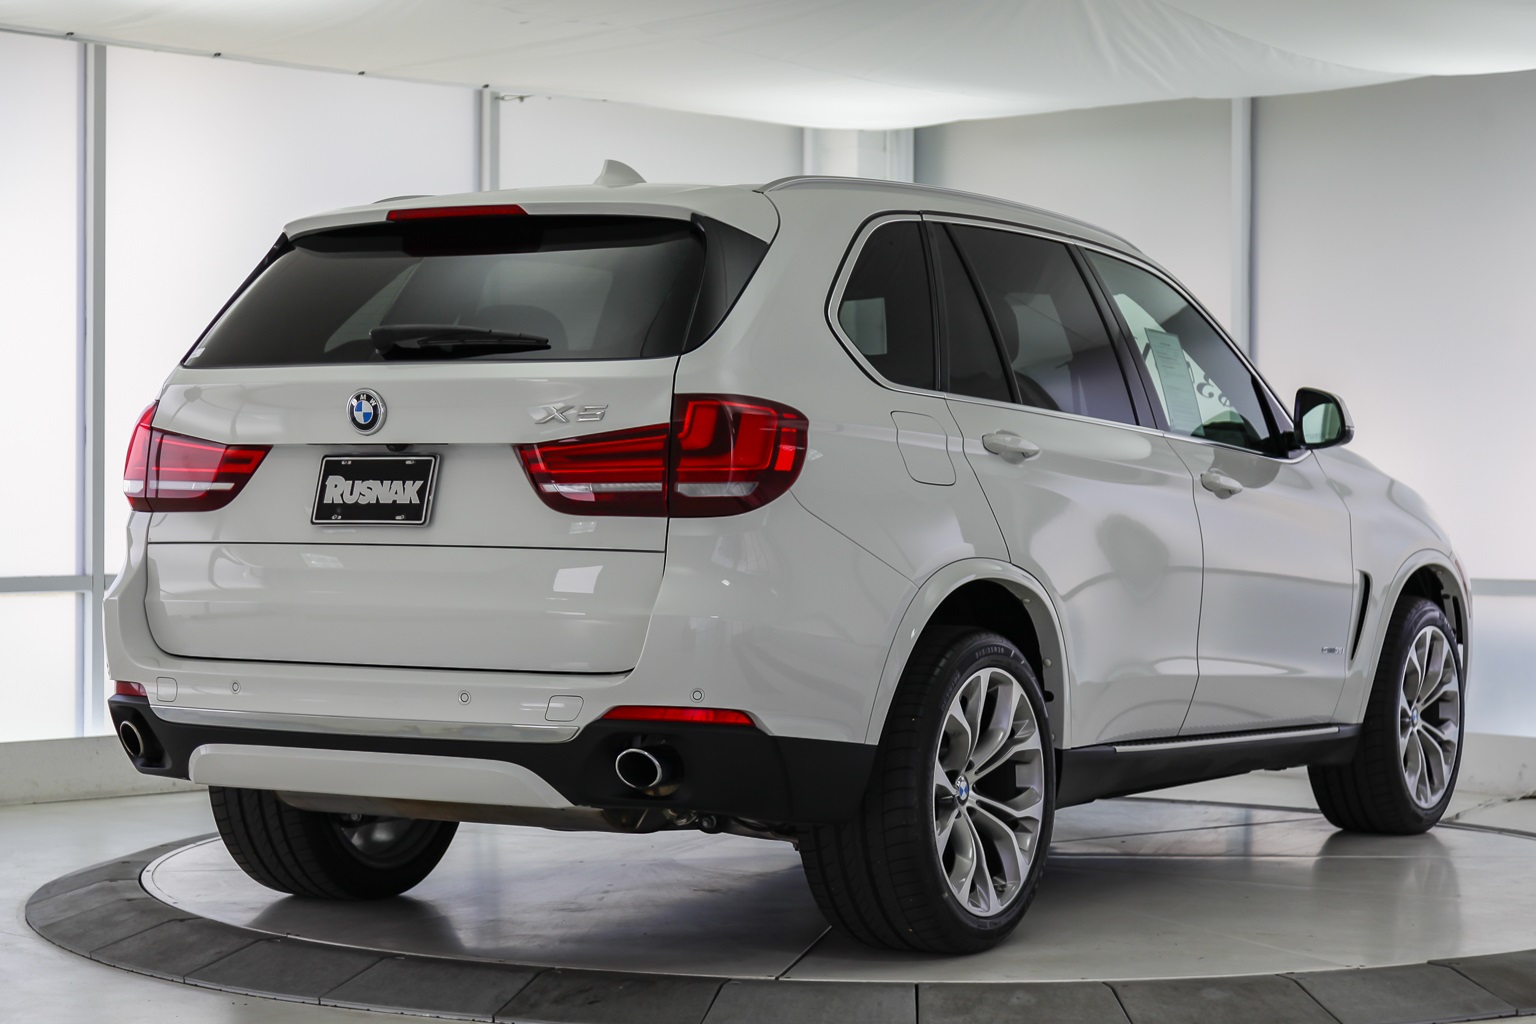 Certified Pre-Owned 2017 BMW X5 sDrive35i 4D Sport Utility in Pasadena ...